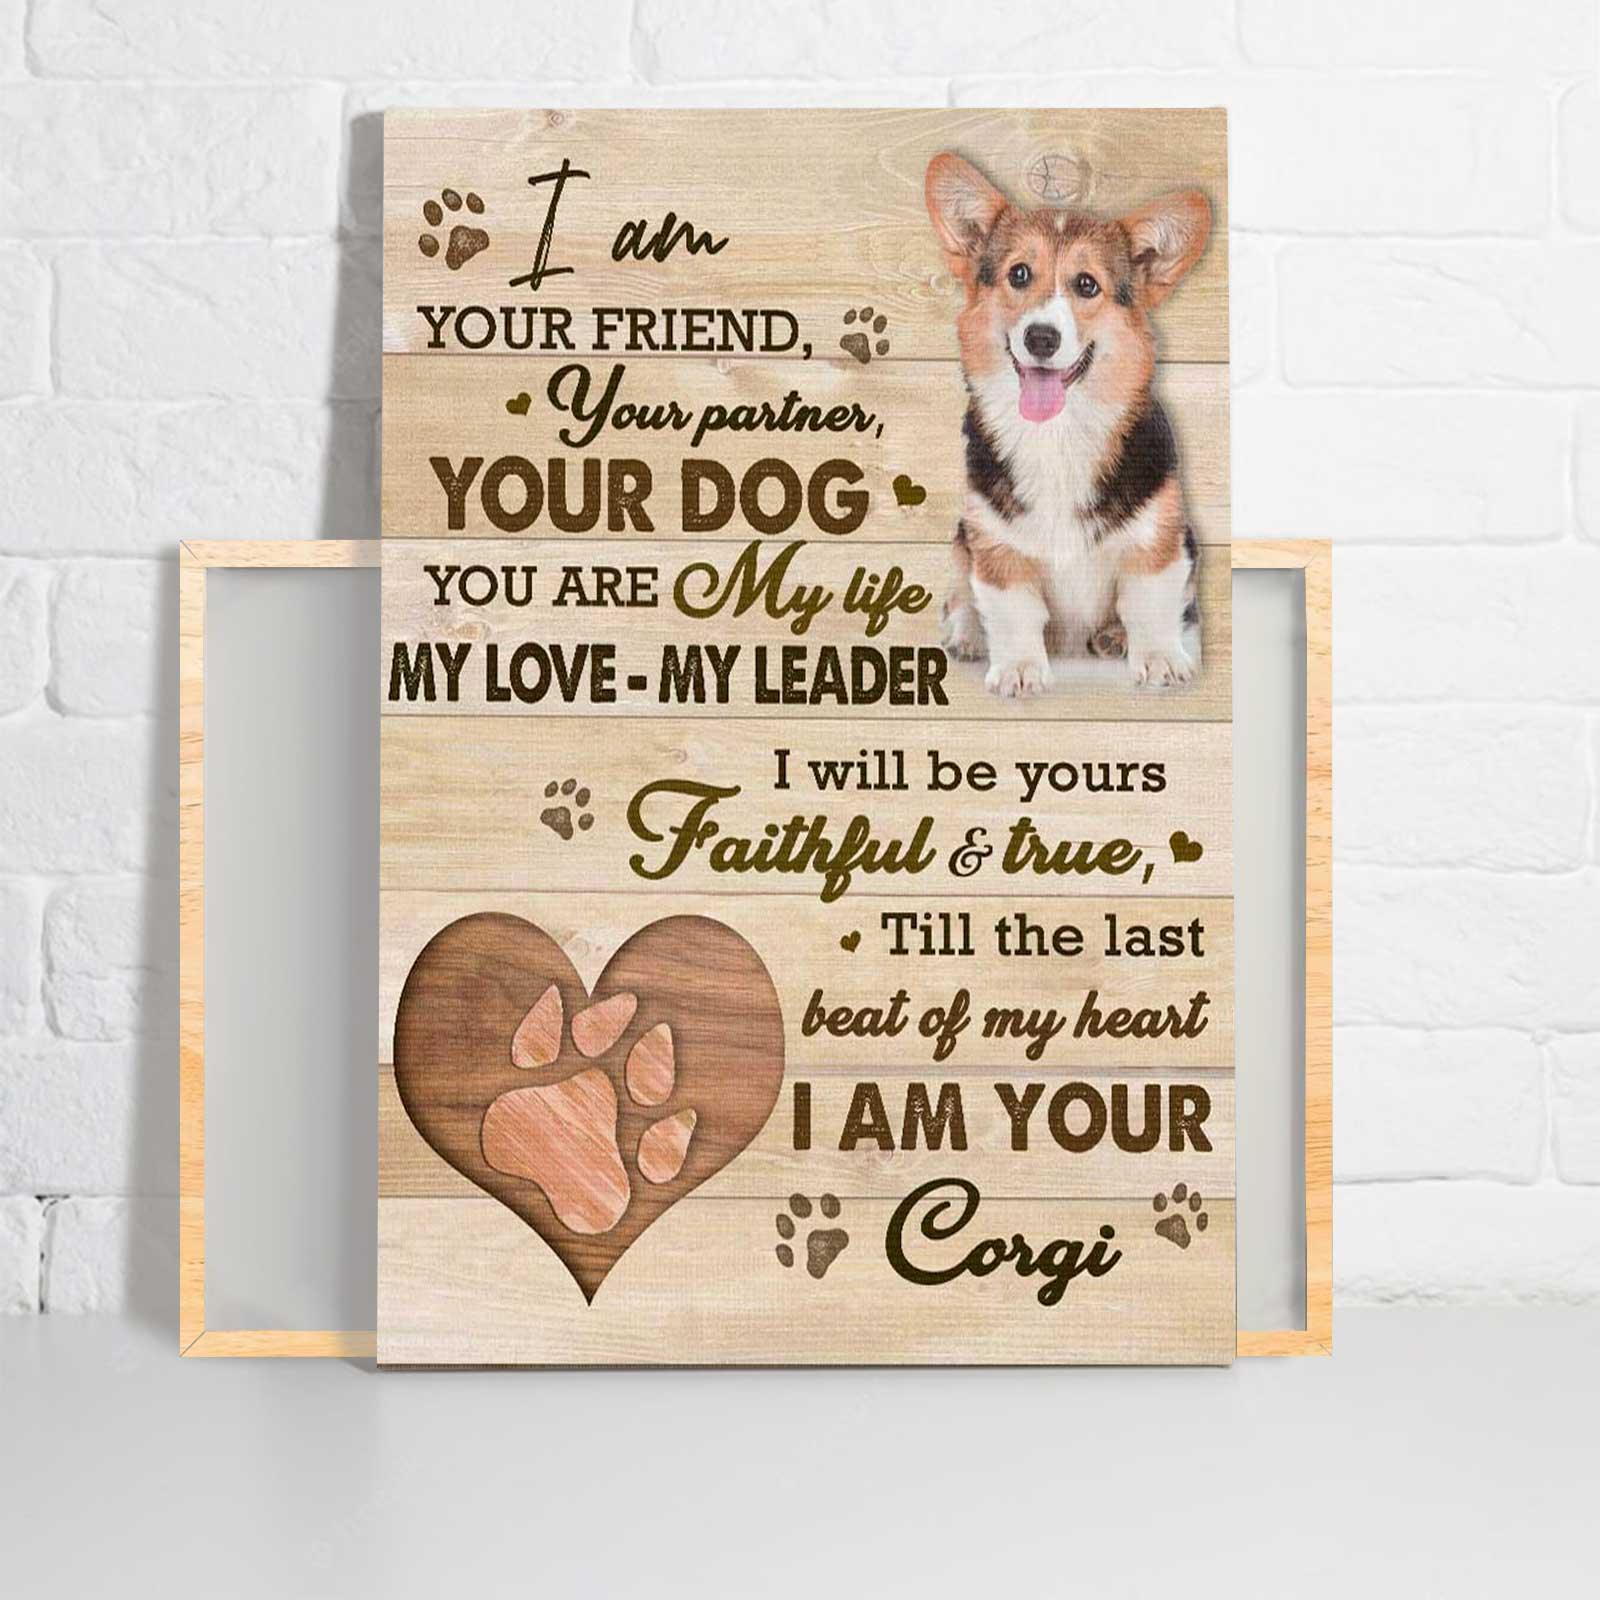 Corgi Portrait Canvas - I Am Your Friend Your Partner Your Dog, You Are My Life, My Love Canvas - Perfect Gift For Corgi Lover - Amzanimalsgift